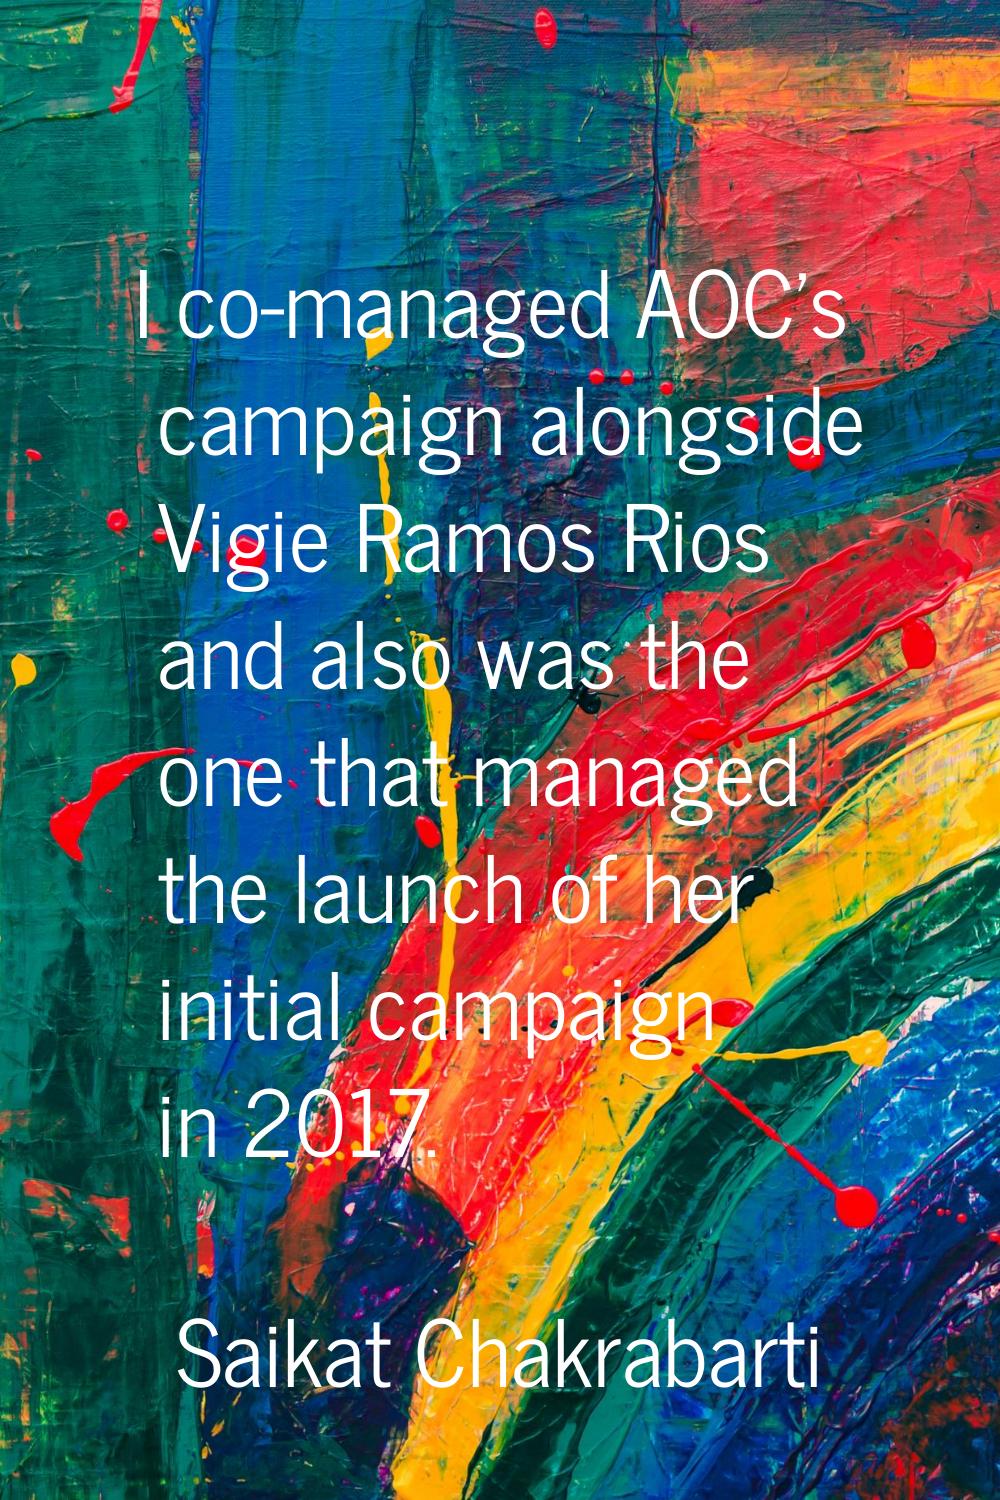 I co-managed AOC's campaign alongside Vigie Ramos Rios and also was the one that managed the launch